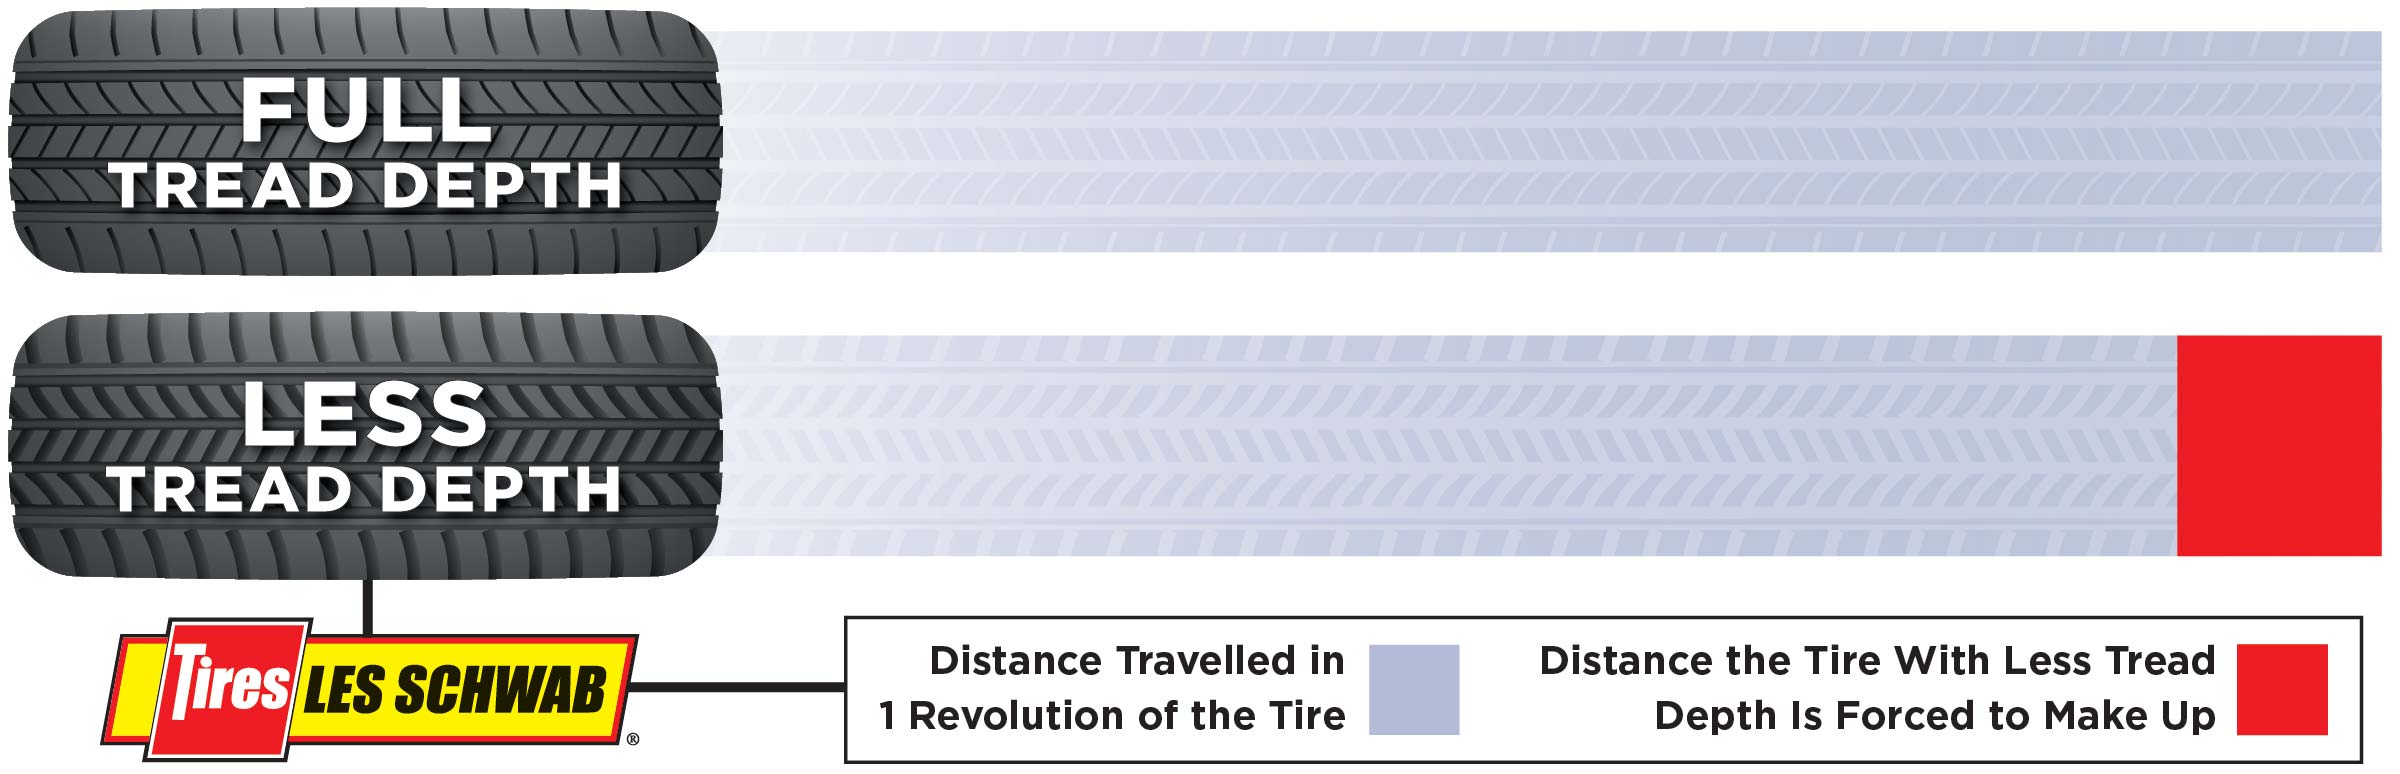 Tires with less tread depth will revolve more times per mile than tires with more tread depth.